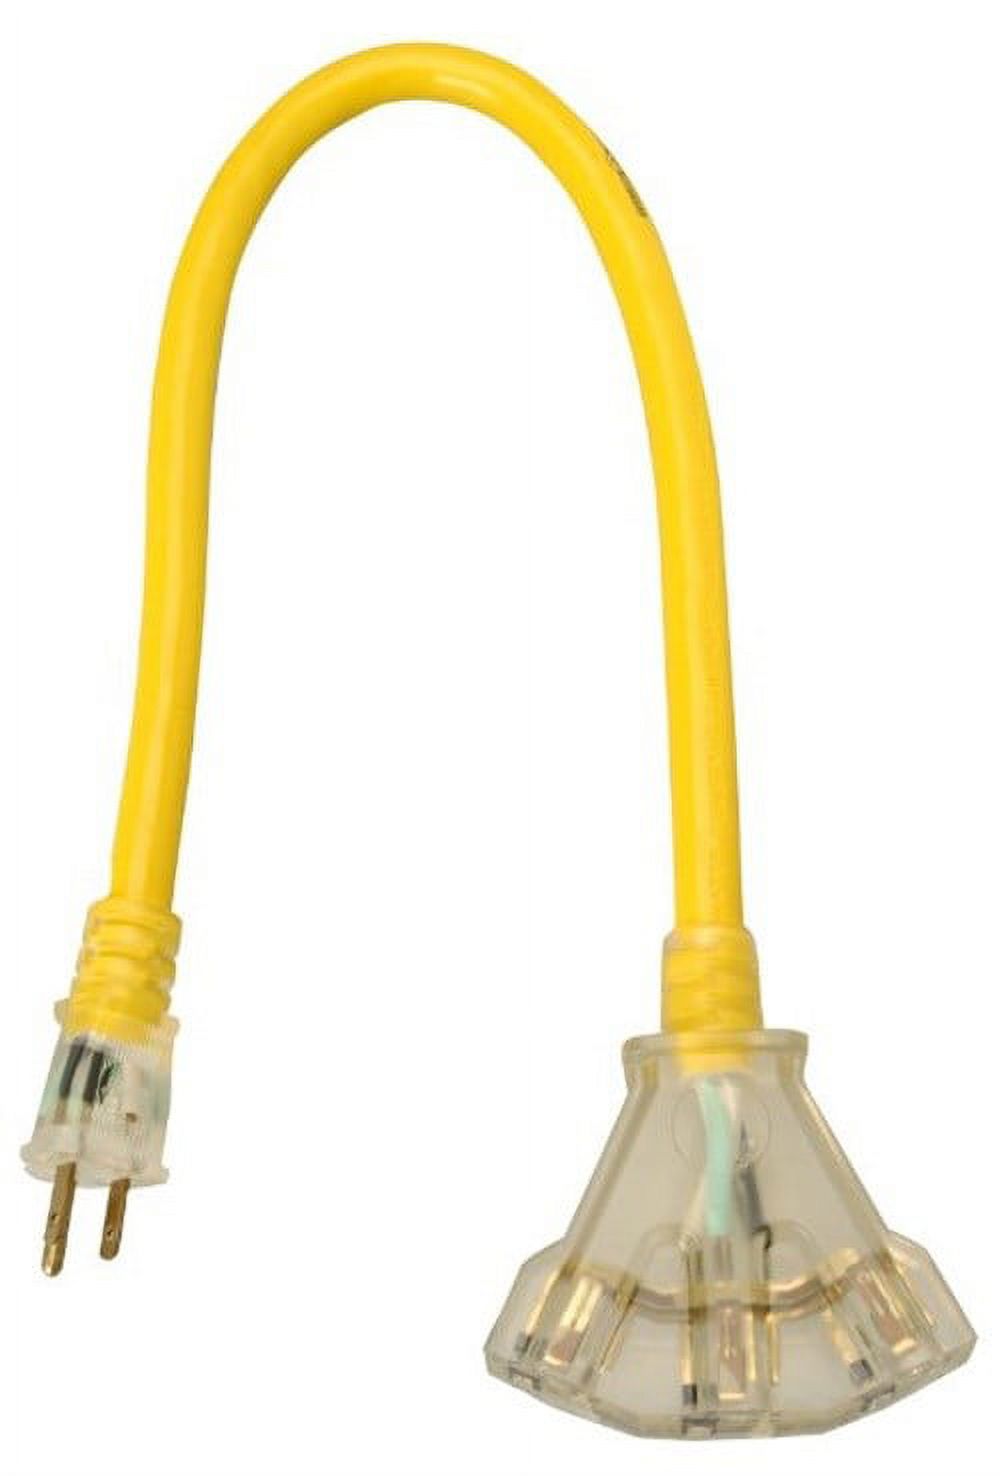 Yellow Jacket 2882 12/3 2' Heavy-Duty Contractor Extension Cord with Lighted Power Block - image 2 of 7